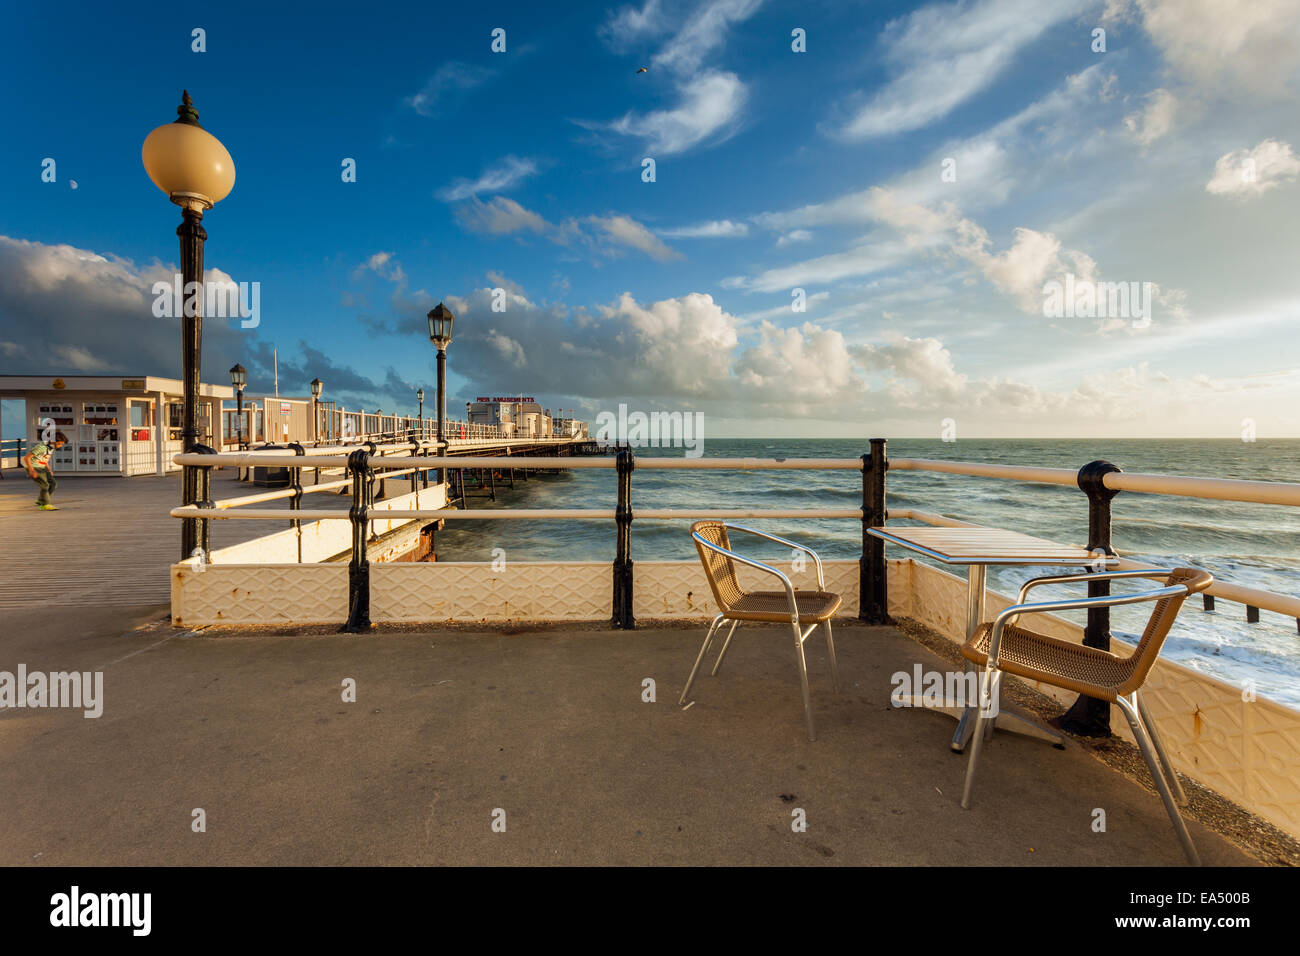 Afternoon at the Worthing Pier, West Sussex, England. Stock Photo